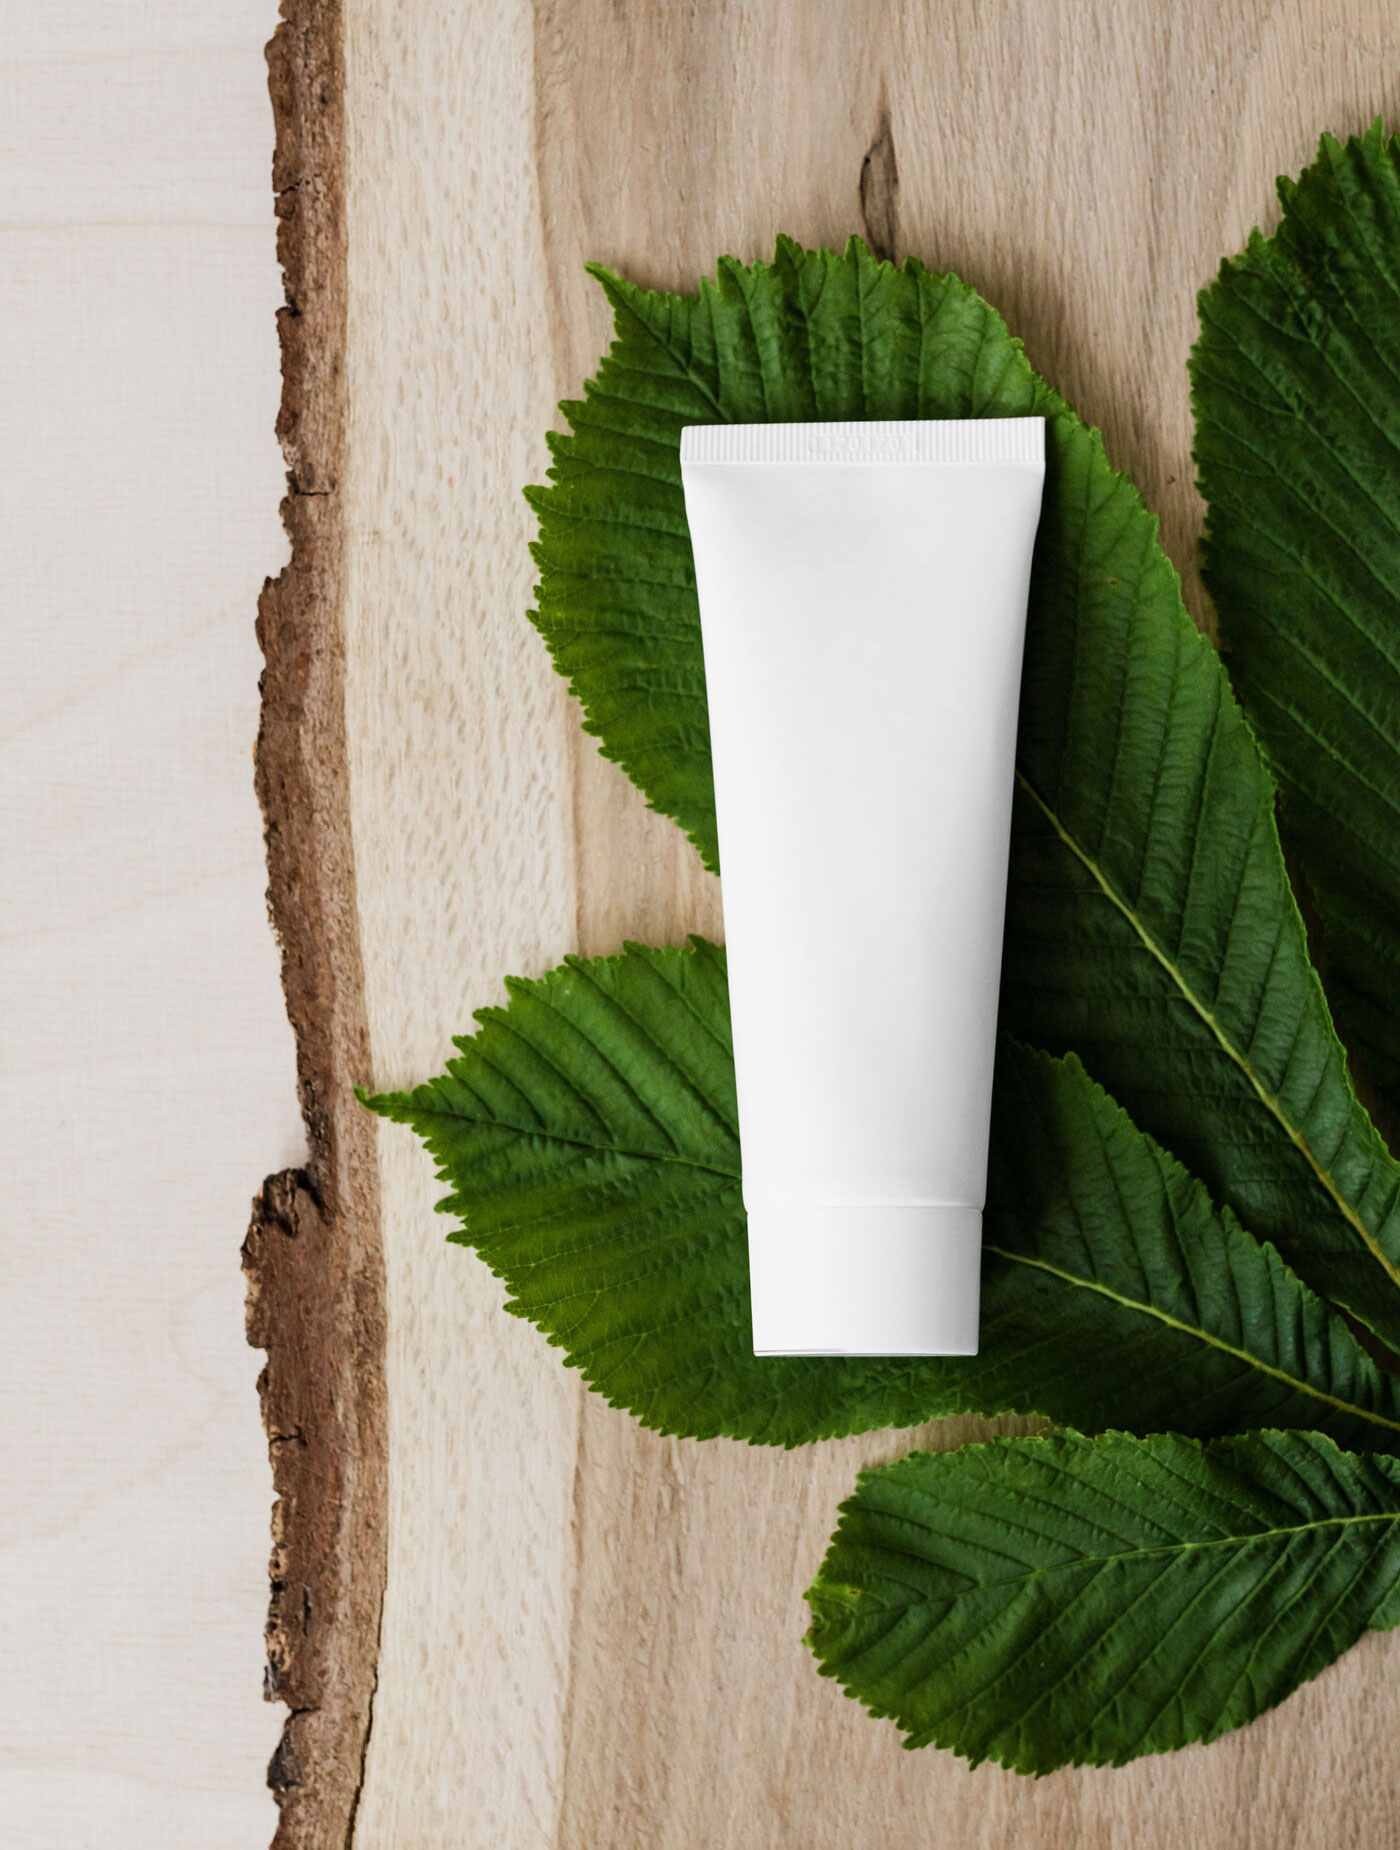 A Cosmetic Tube on Bunch of Leaves and a Piece of Wood Mockup FREE PSD